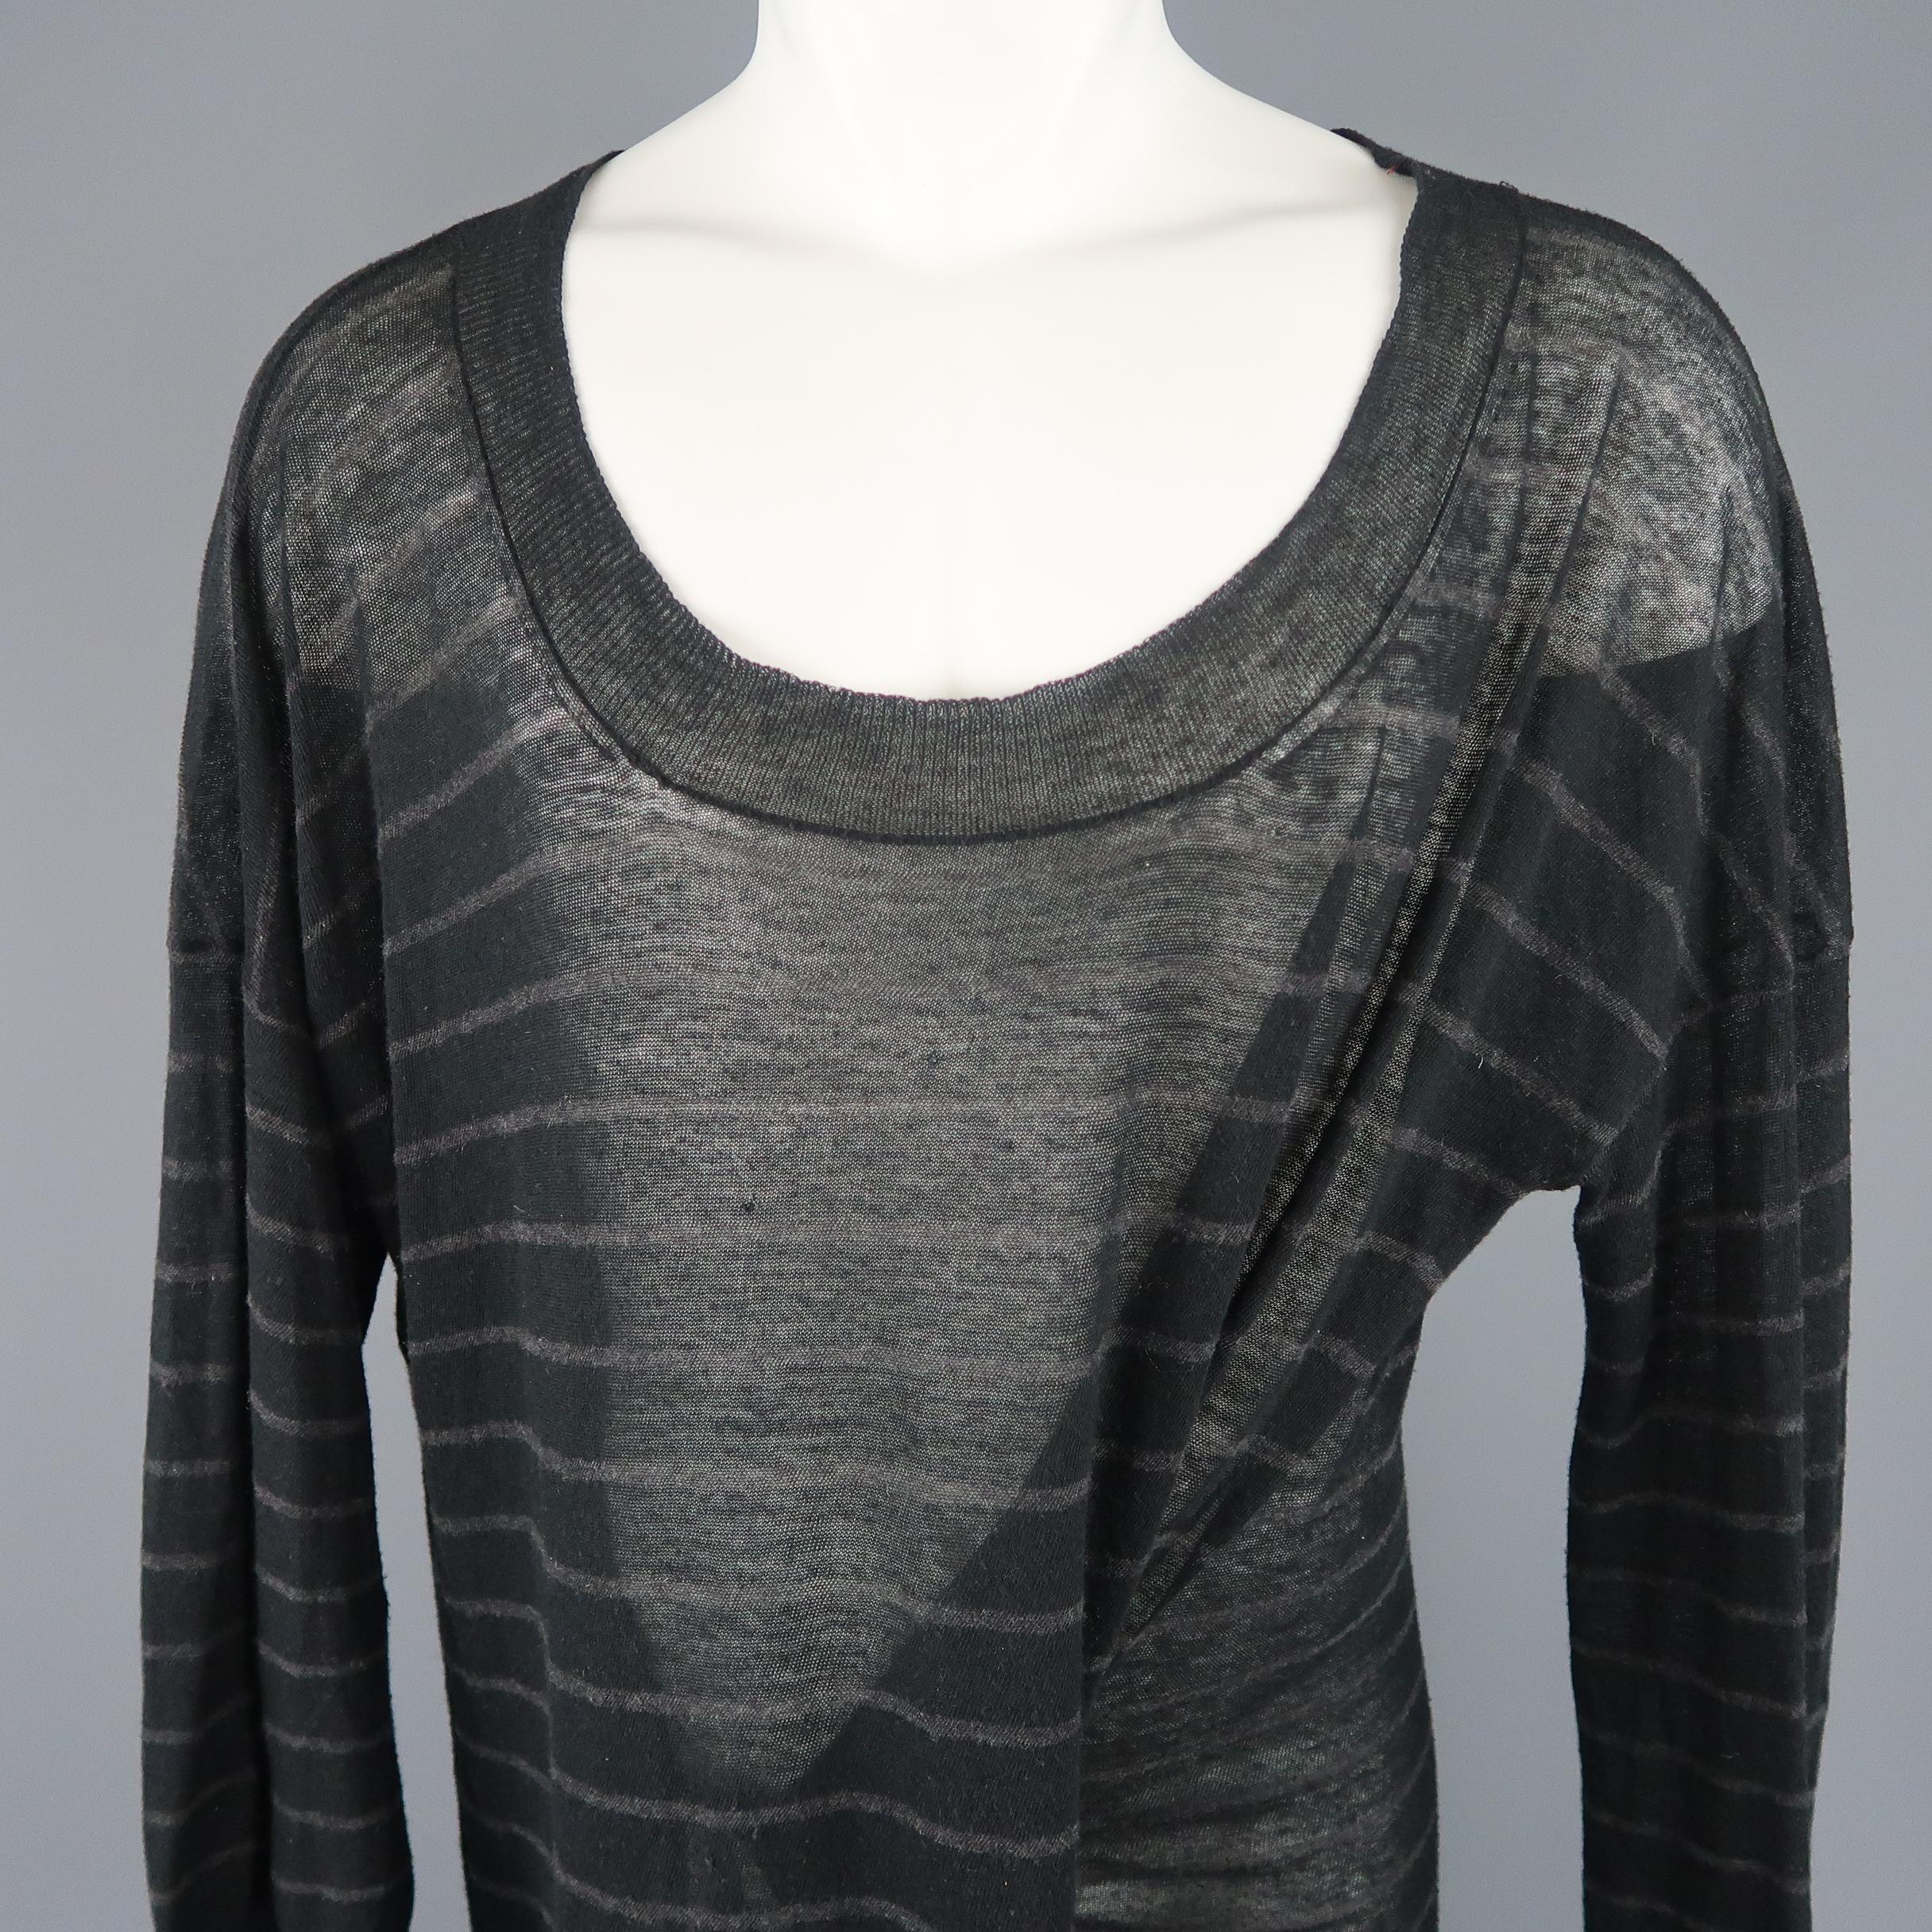 ANN DEMEULEMEESTER oversized sweater comes in a sheer cotton cashmere blend knit with gray stripe pattern, scoop neck, and internal tie detail. Made in Belgium.
 
Good Pre-Owned Condition.
Marked: 38
 
Measurements:
 
Shoulder: 32 in.
Chest: 52